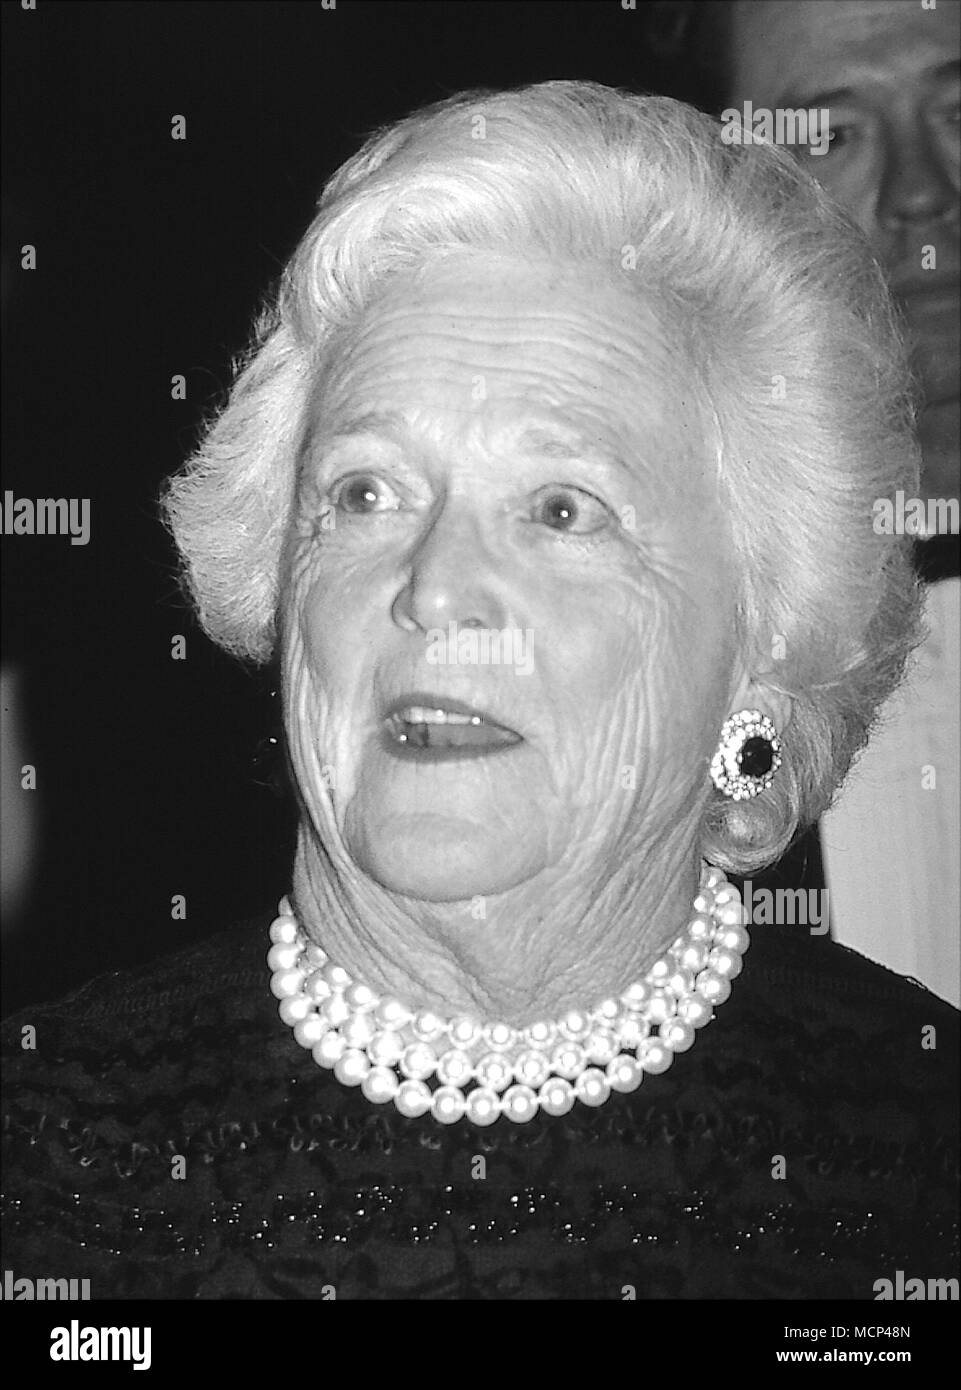 ***FILE PHOO*** BARBARA BUSH HAS PASSED AWAY (1925-2018) Barbara Bush attends the Literacy Gala Evening of Readings at the Vivian Beaumont Theatre in New York City, 5/8/1995 Credit: Walter McBride/MediaPunch Stock Photo